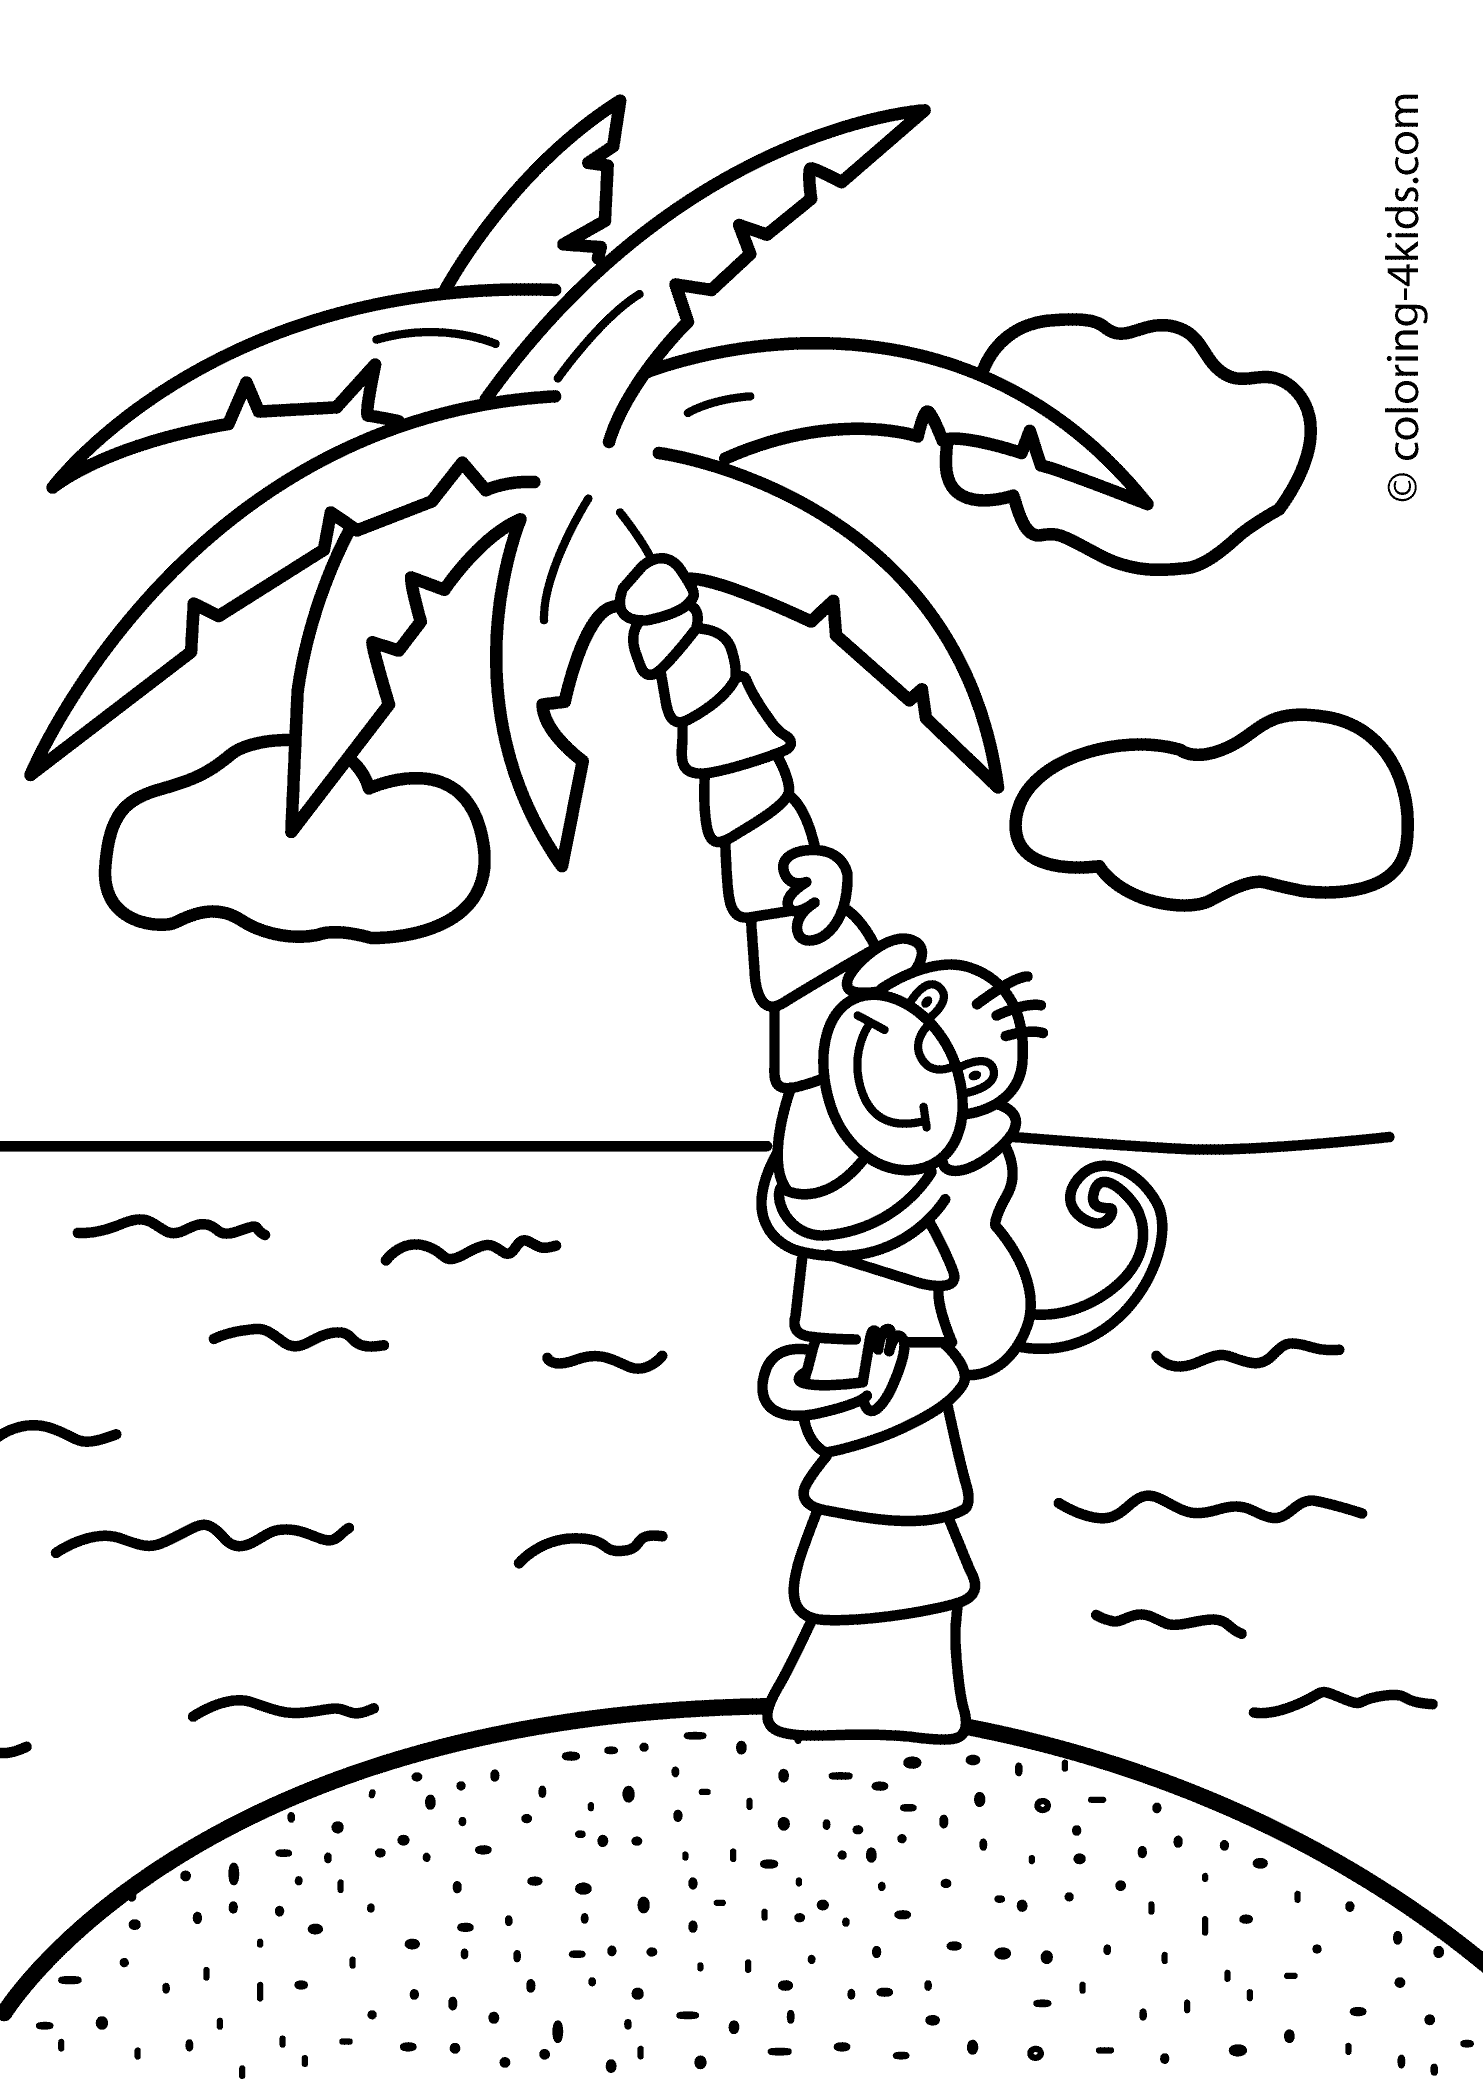 Effortfulg: Island Coloring Pages